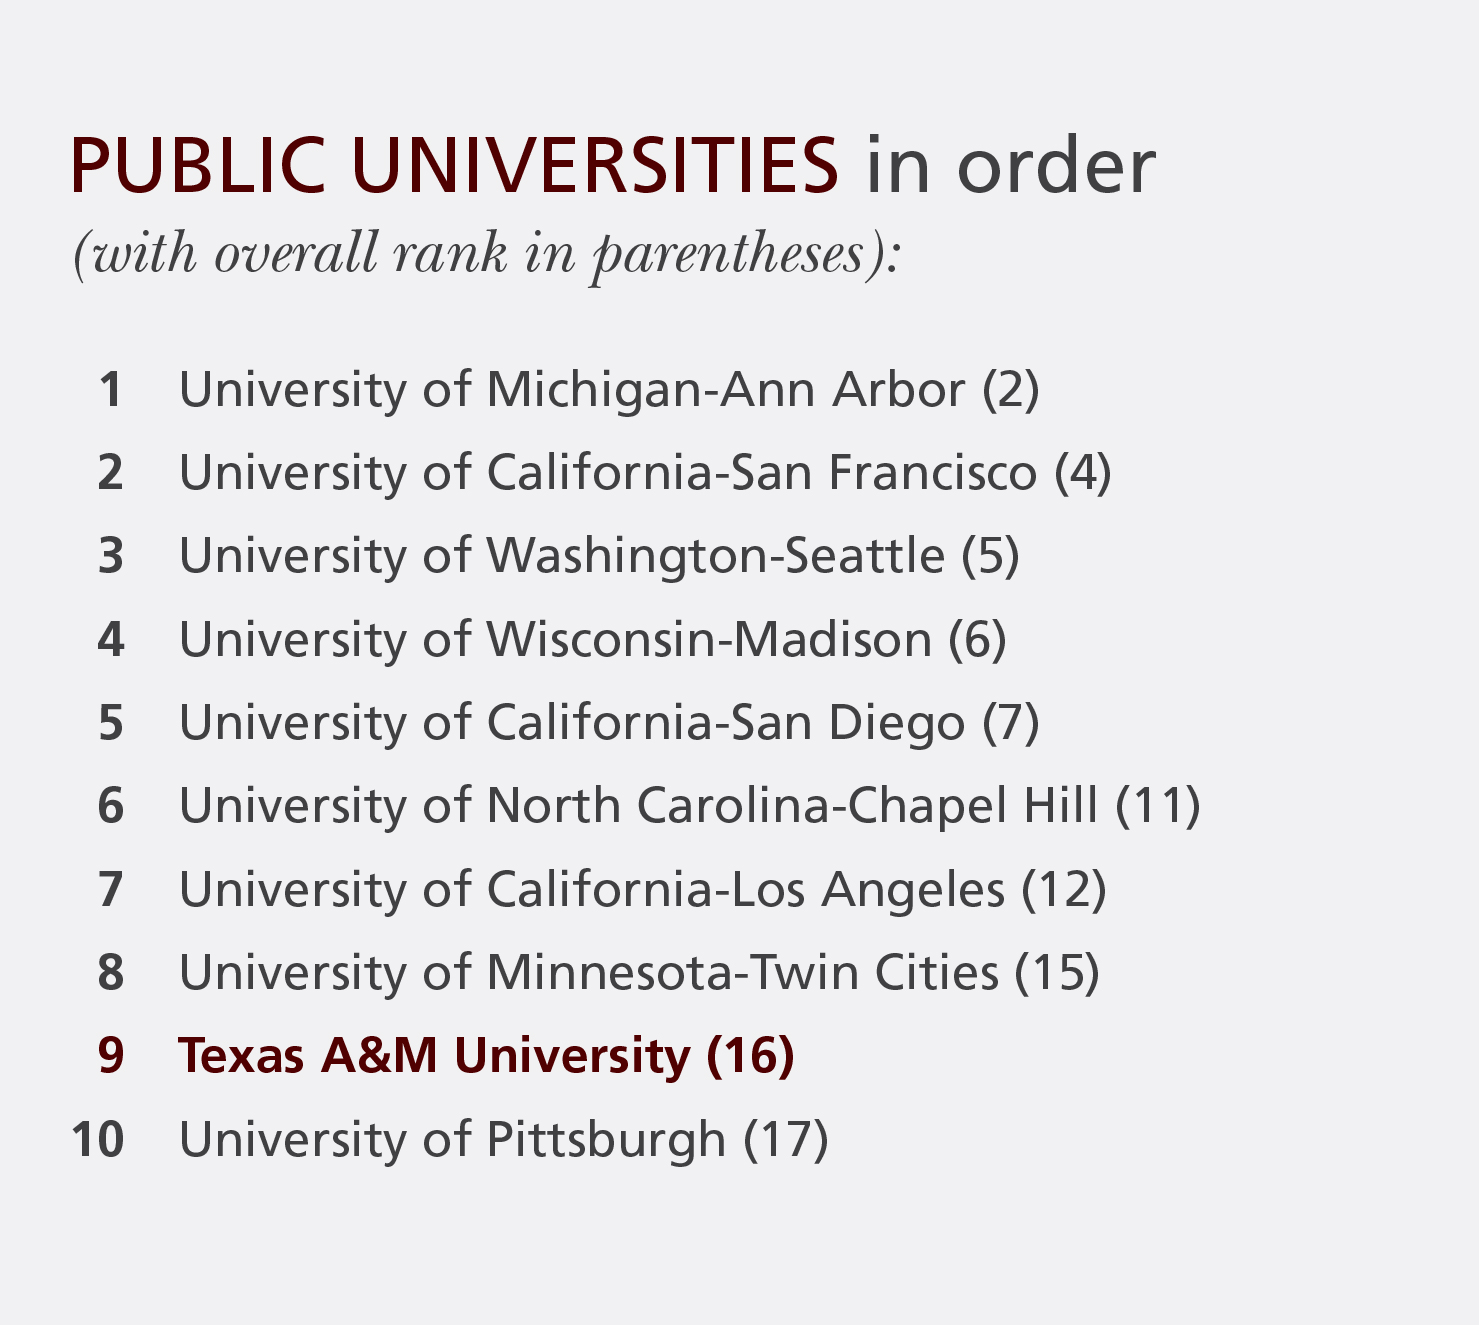 Latest NSF survey ranks Texas A&M at 16th among nation’s research